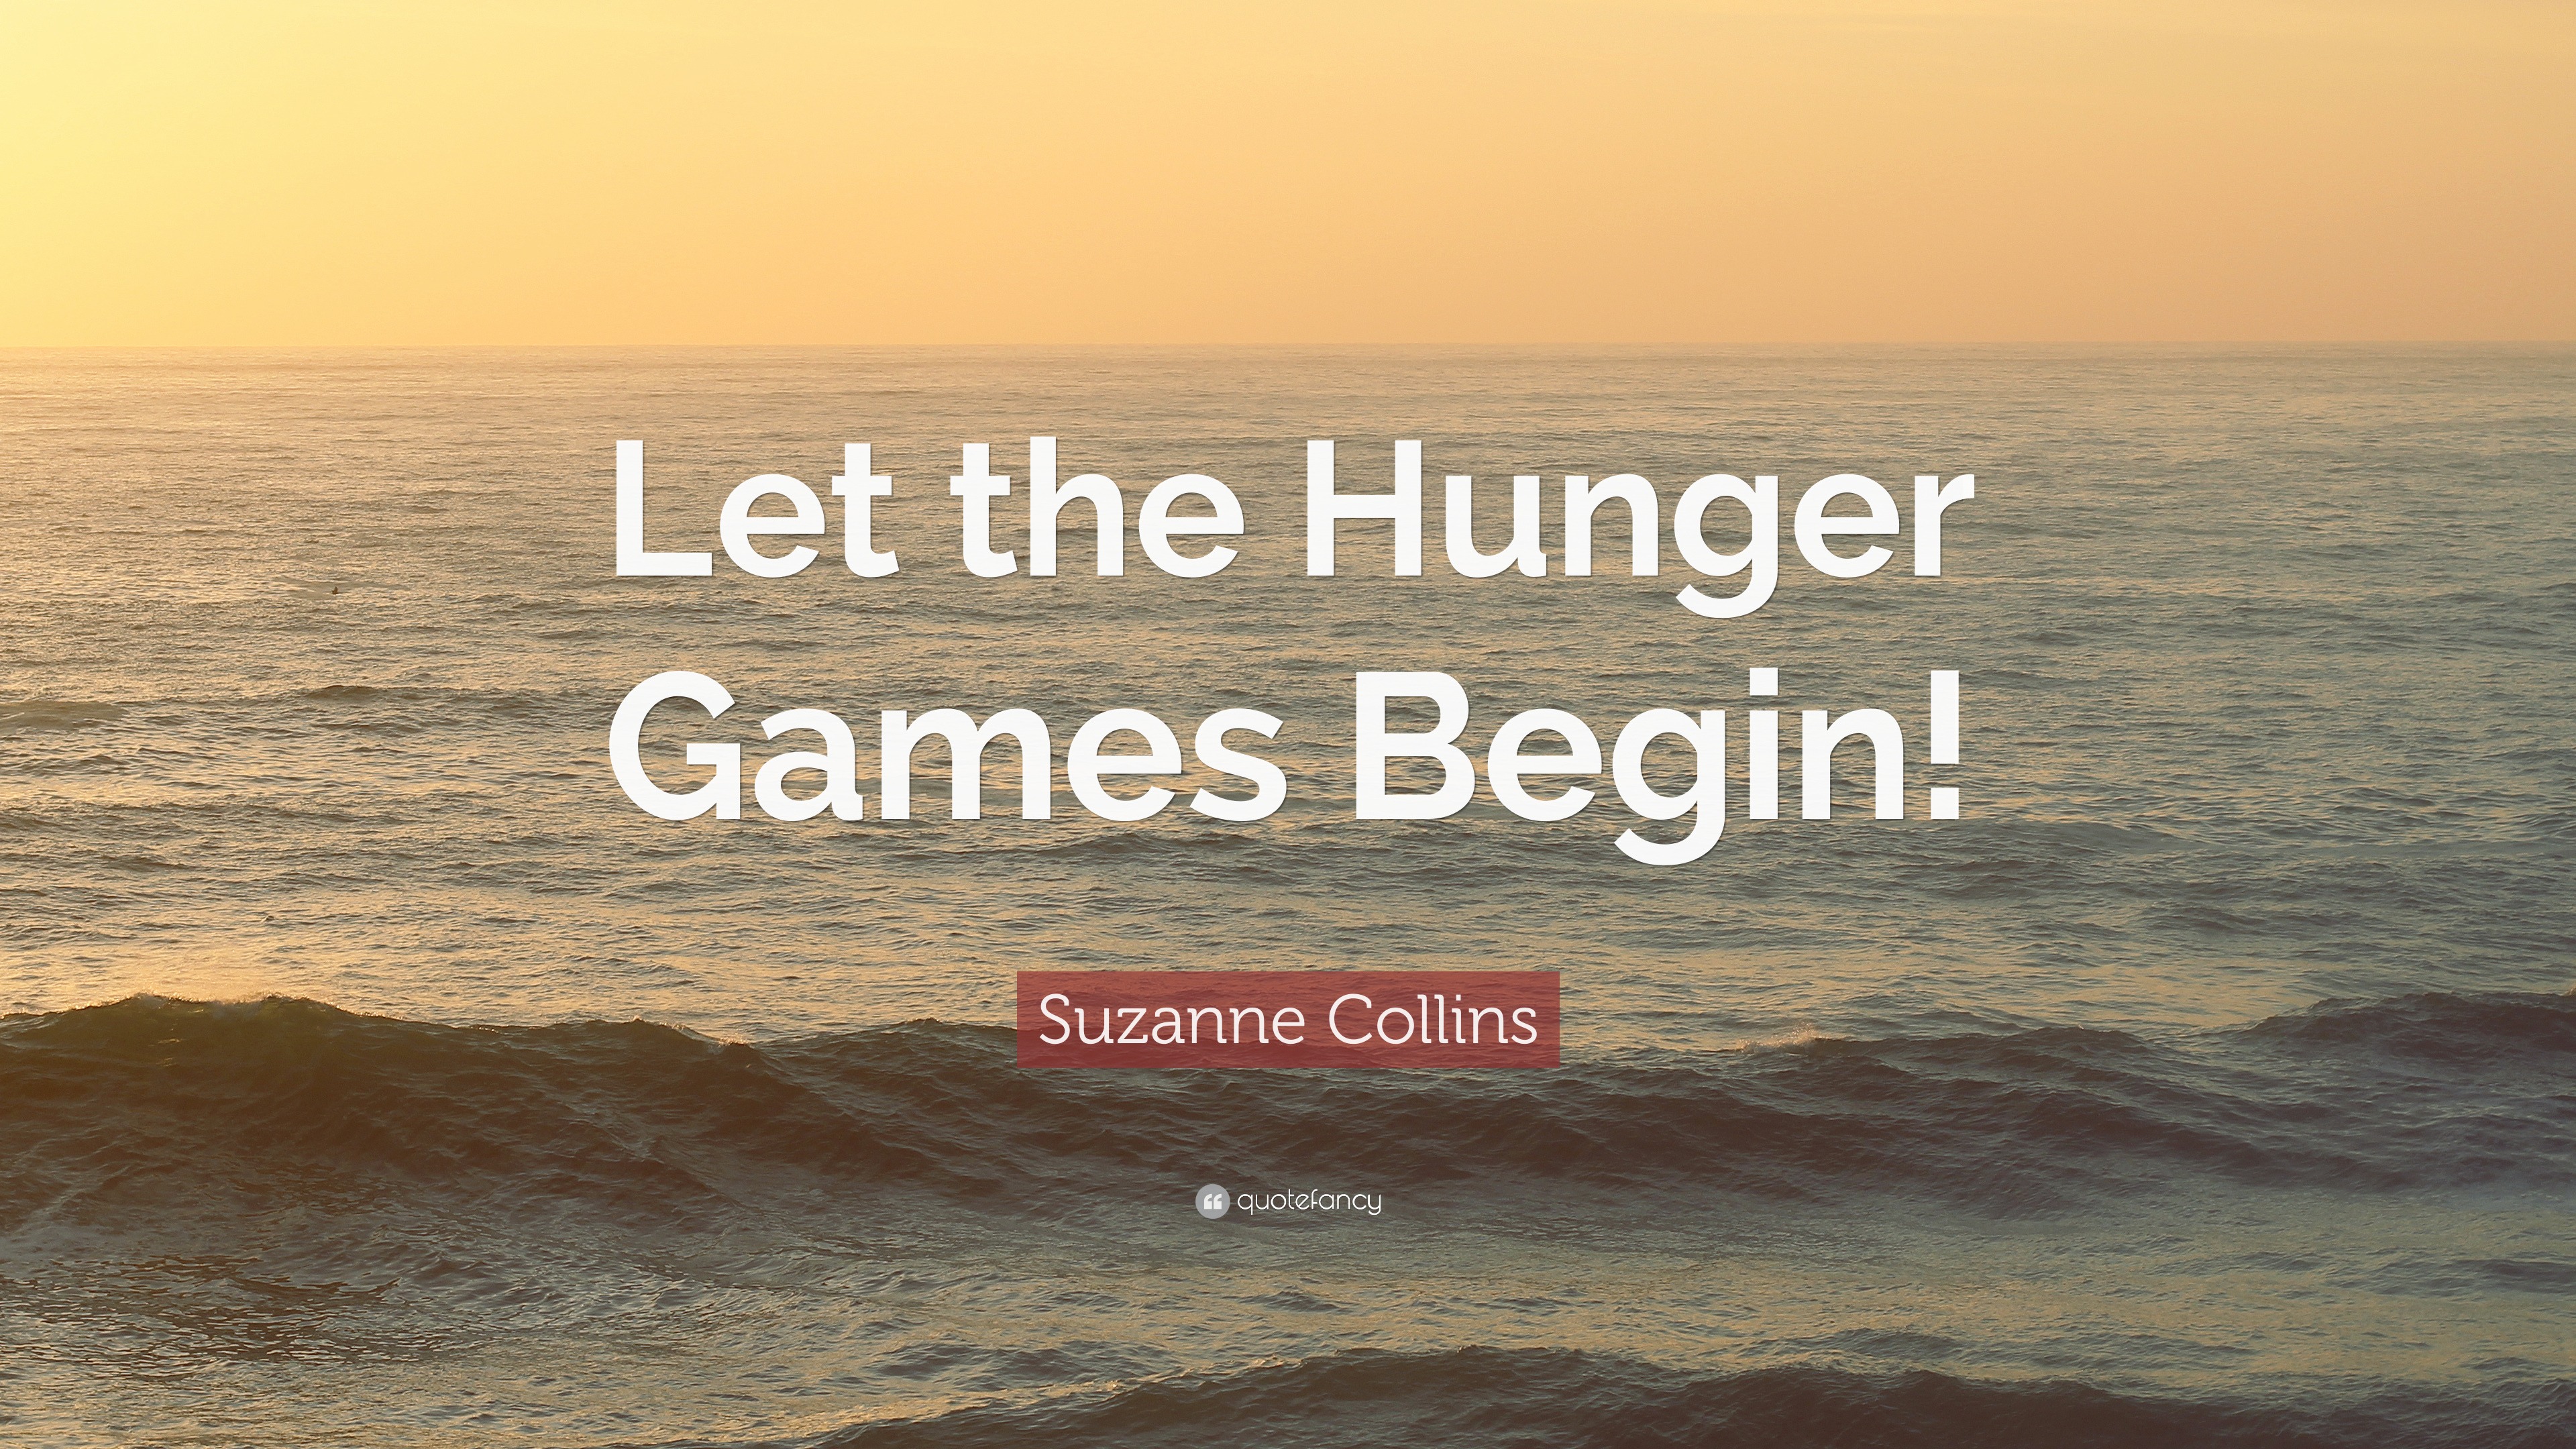 Suzanne Collins Quote: “Let the Seventy-forth Hunger Games begin, Cato, I  think. Let them begin